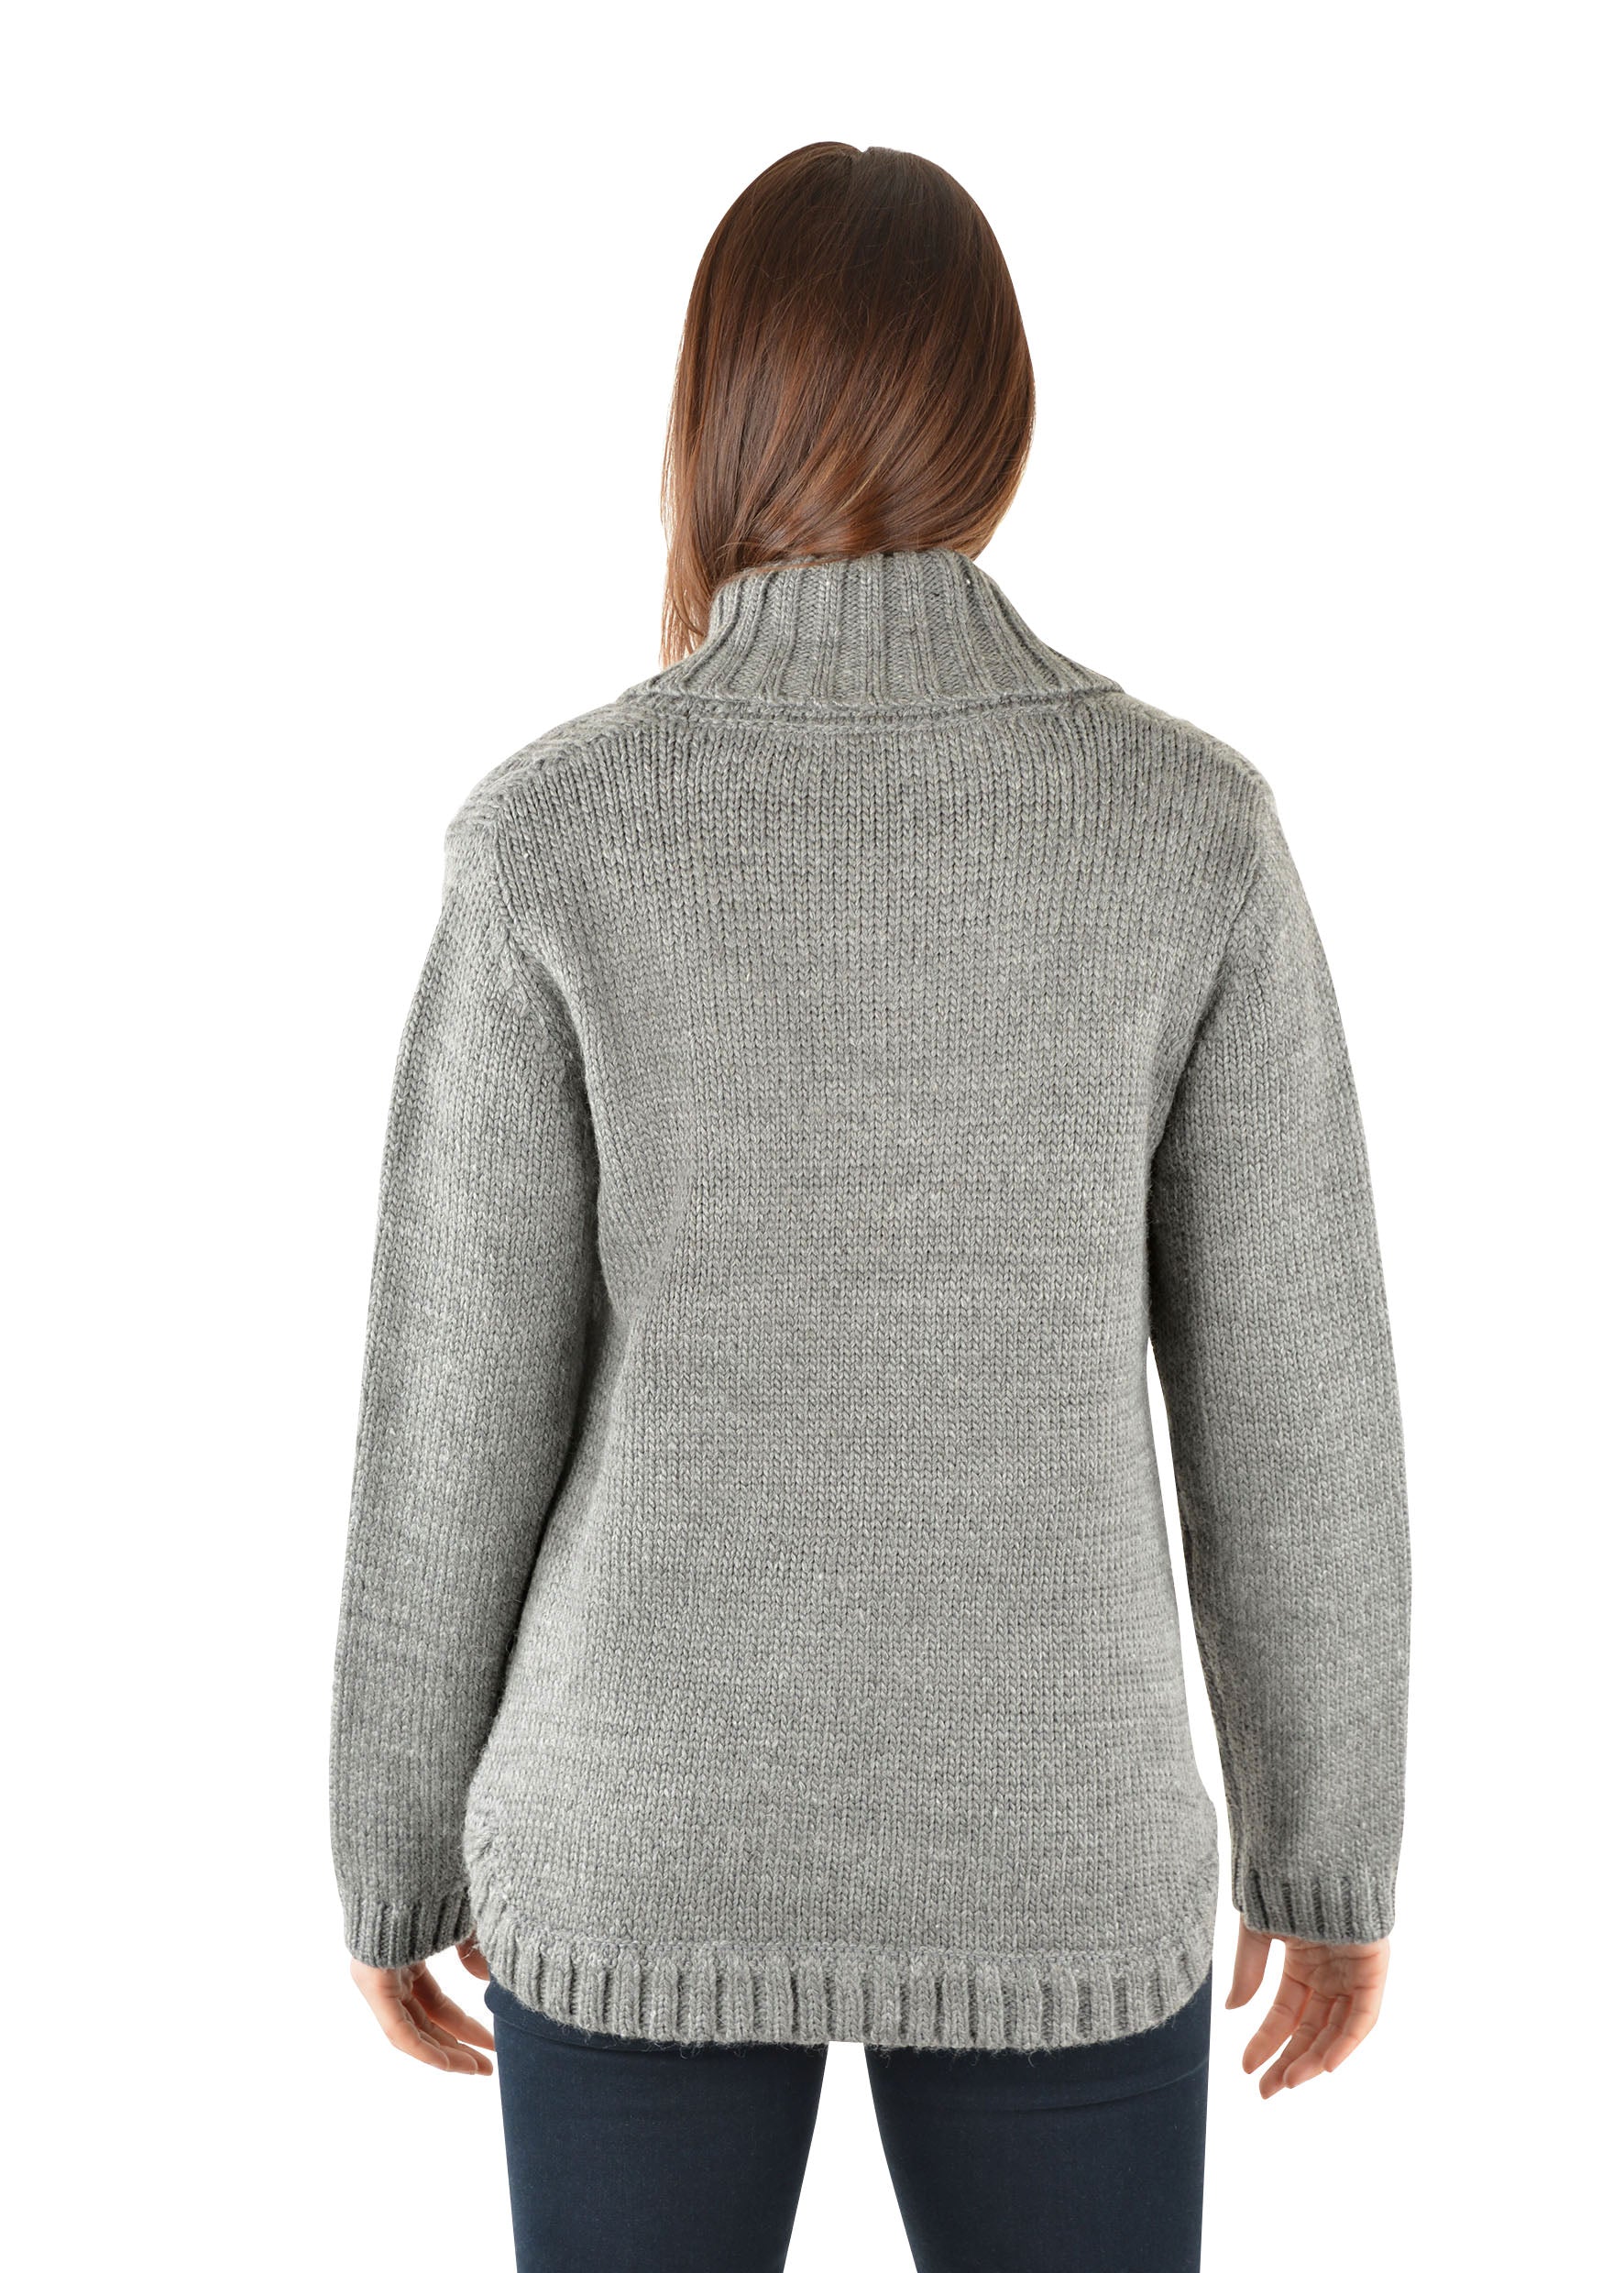 Thomas Cook Ava Curved Hem Cable Knit